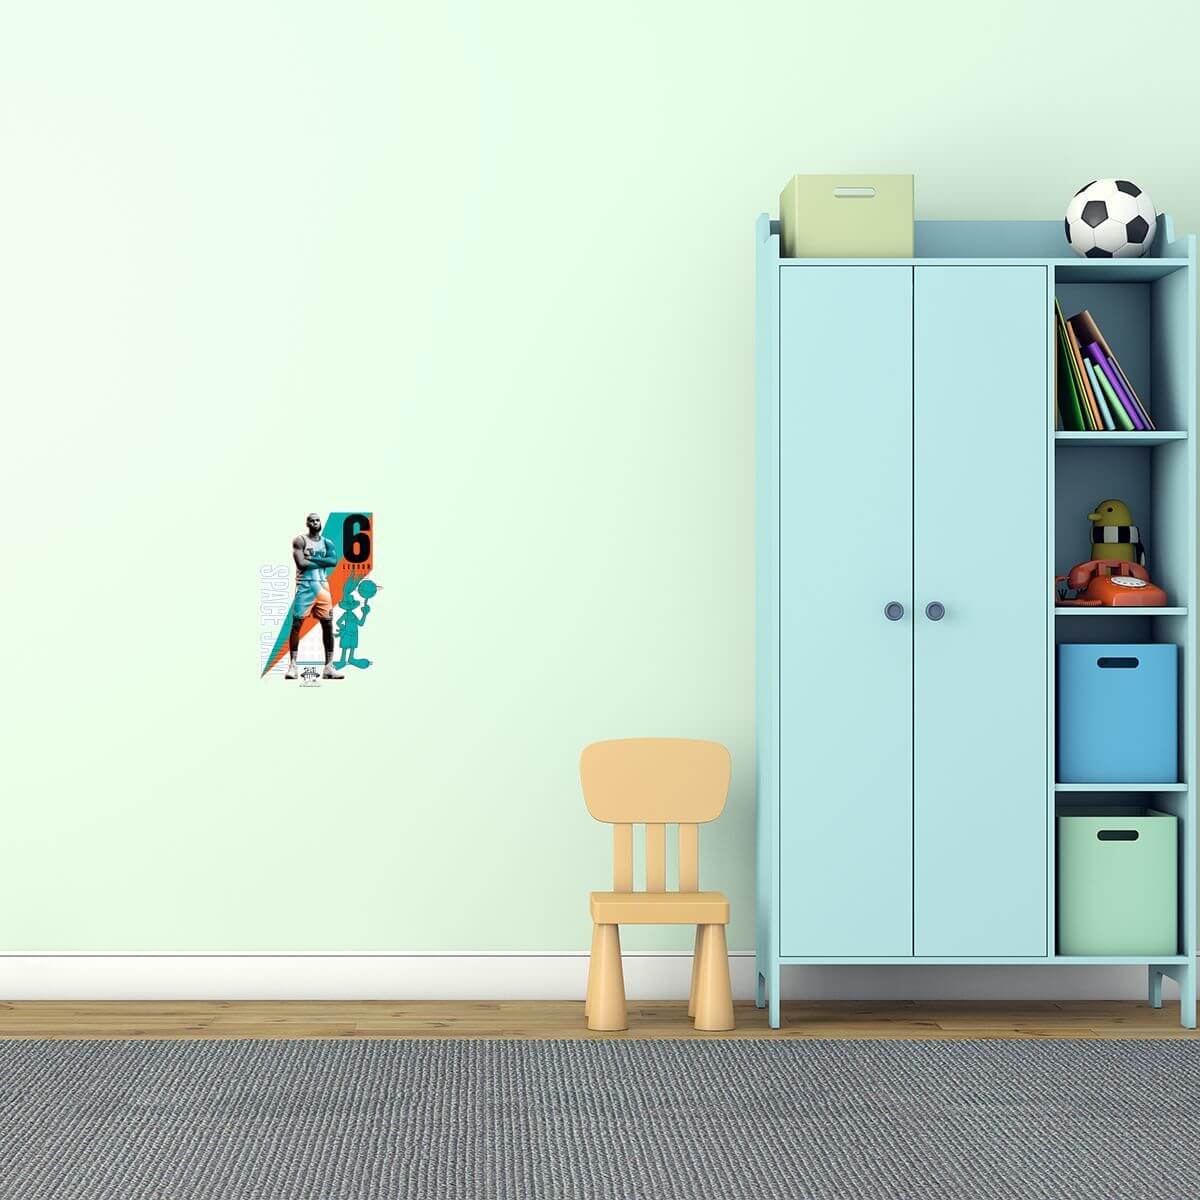 Kismet Decals Space Jam: A New Legacy LeBron King James Licensed Wall Sticker - Easy DIY Looney Tunes Home & Room Decor - Kismet Decals